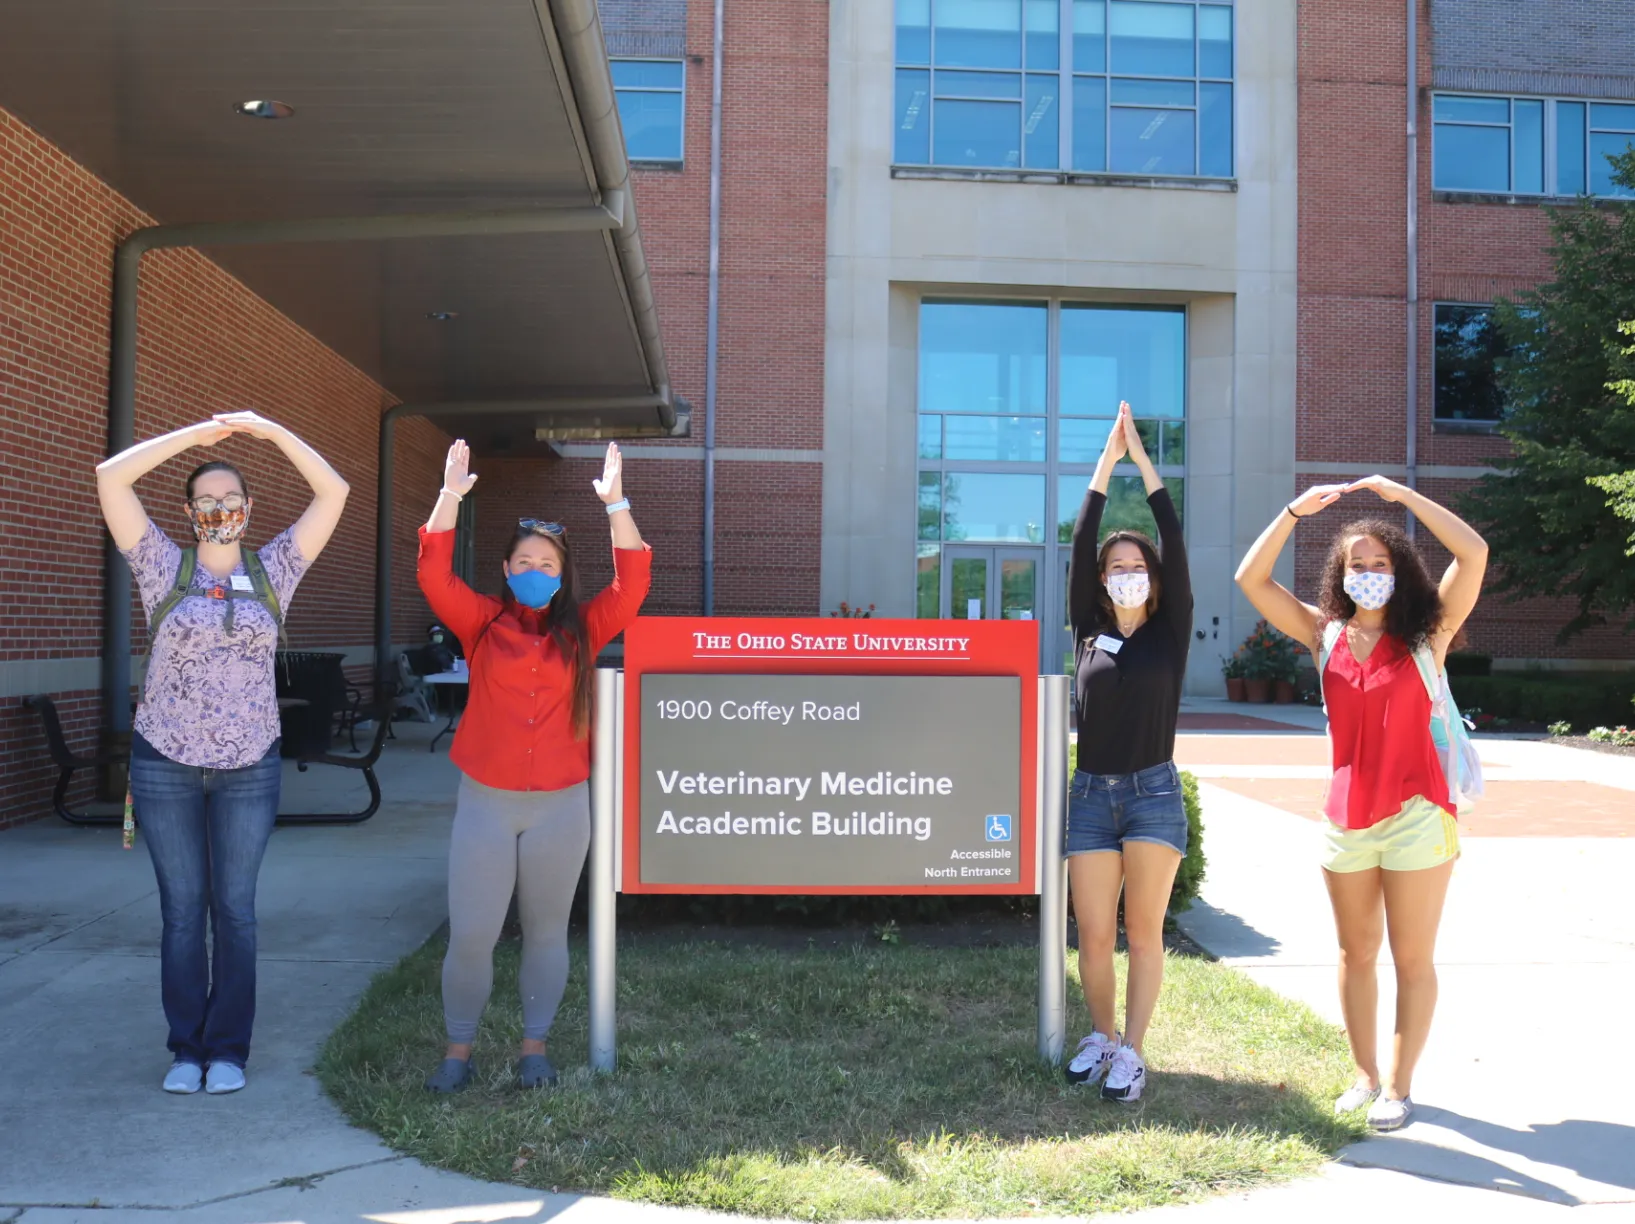 Four students posing in front of the Veterinary Medicine Academic Building sign